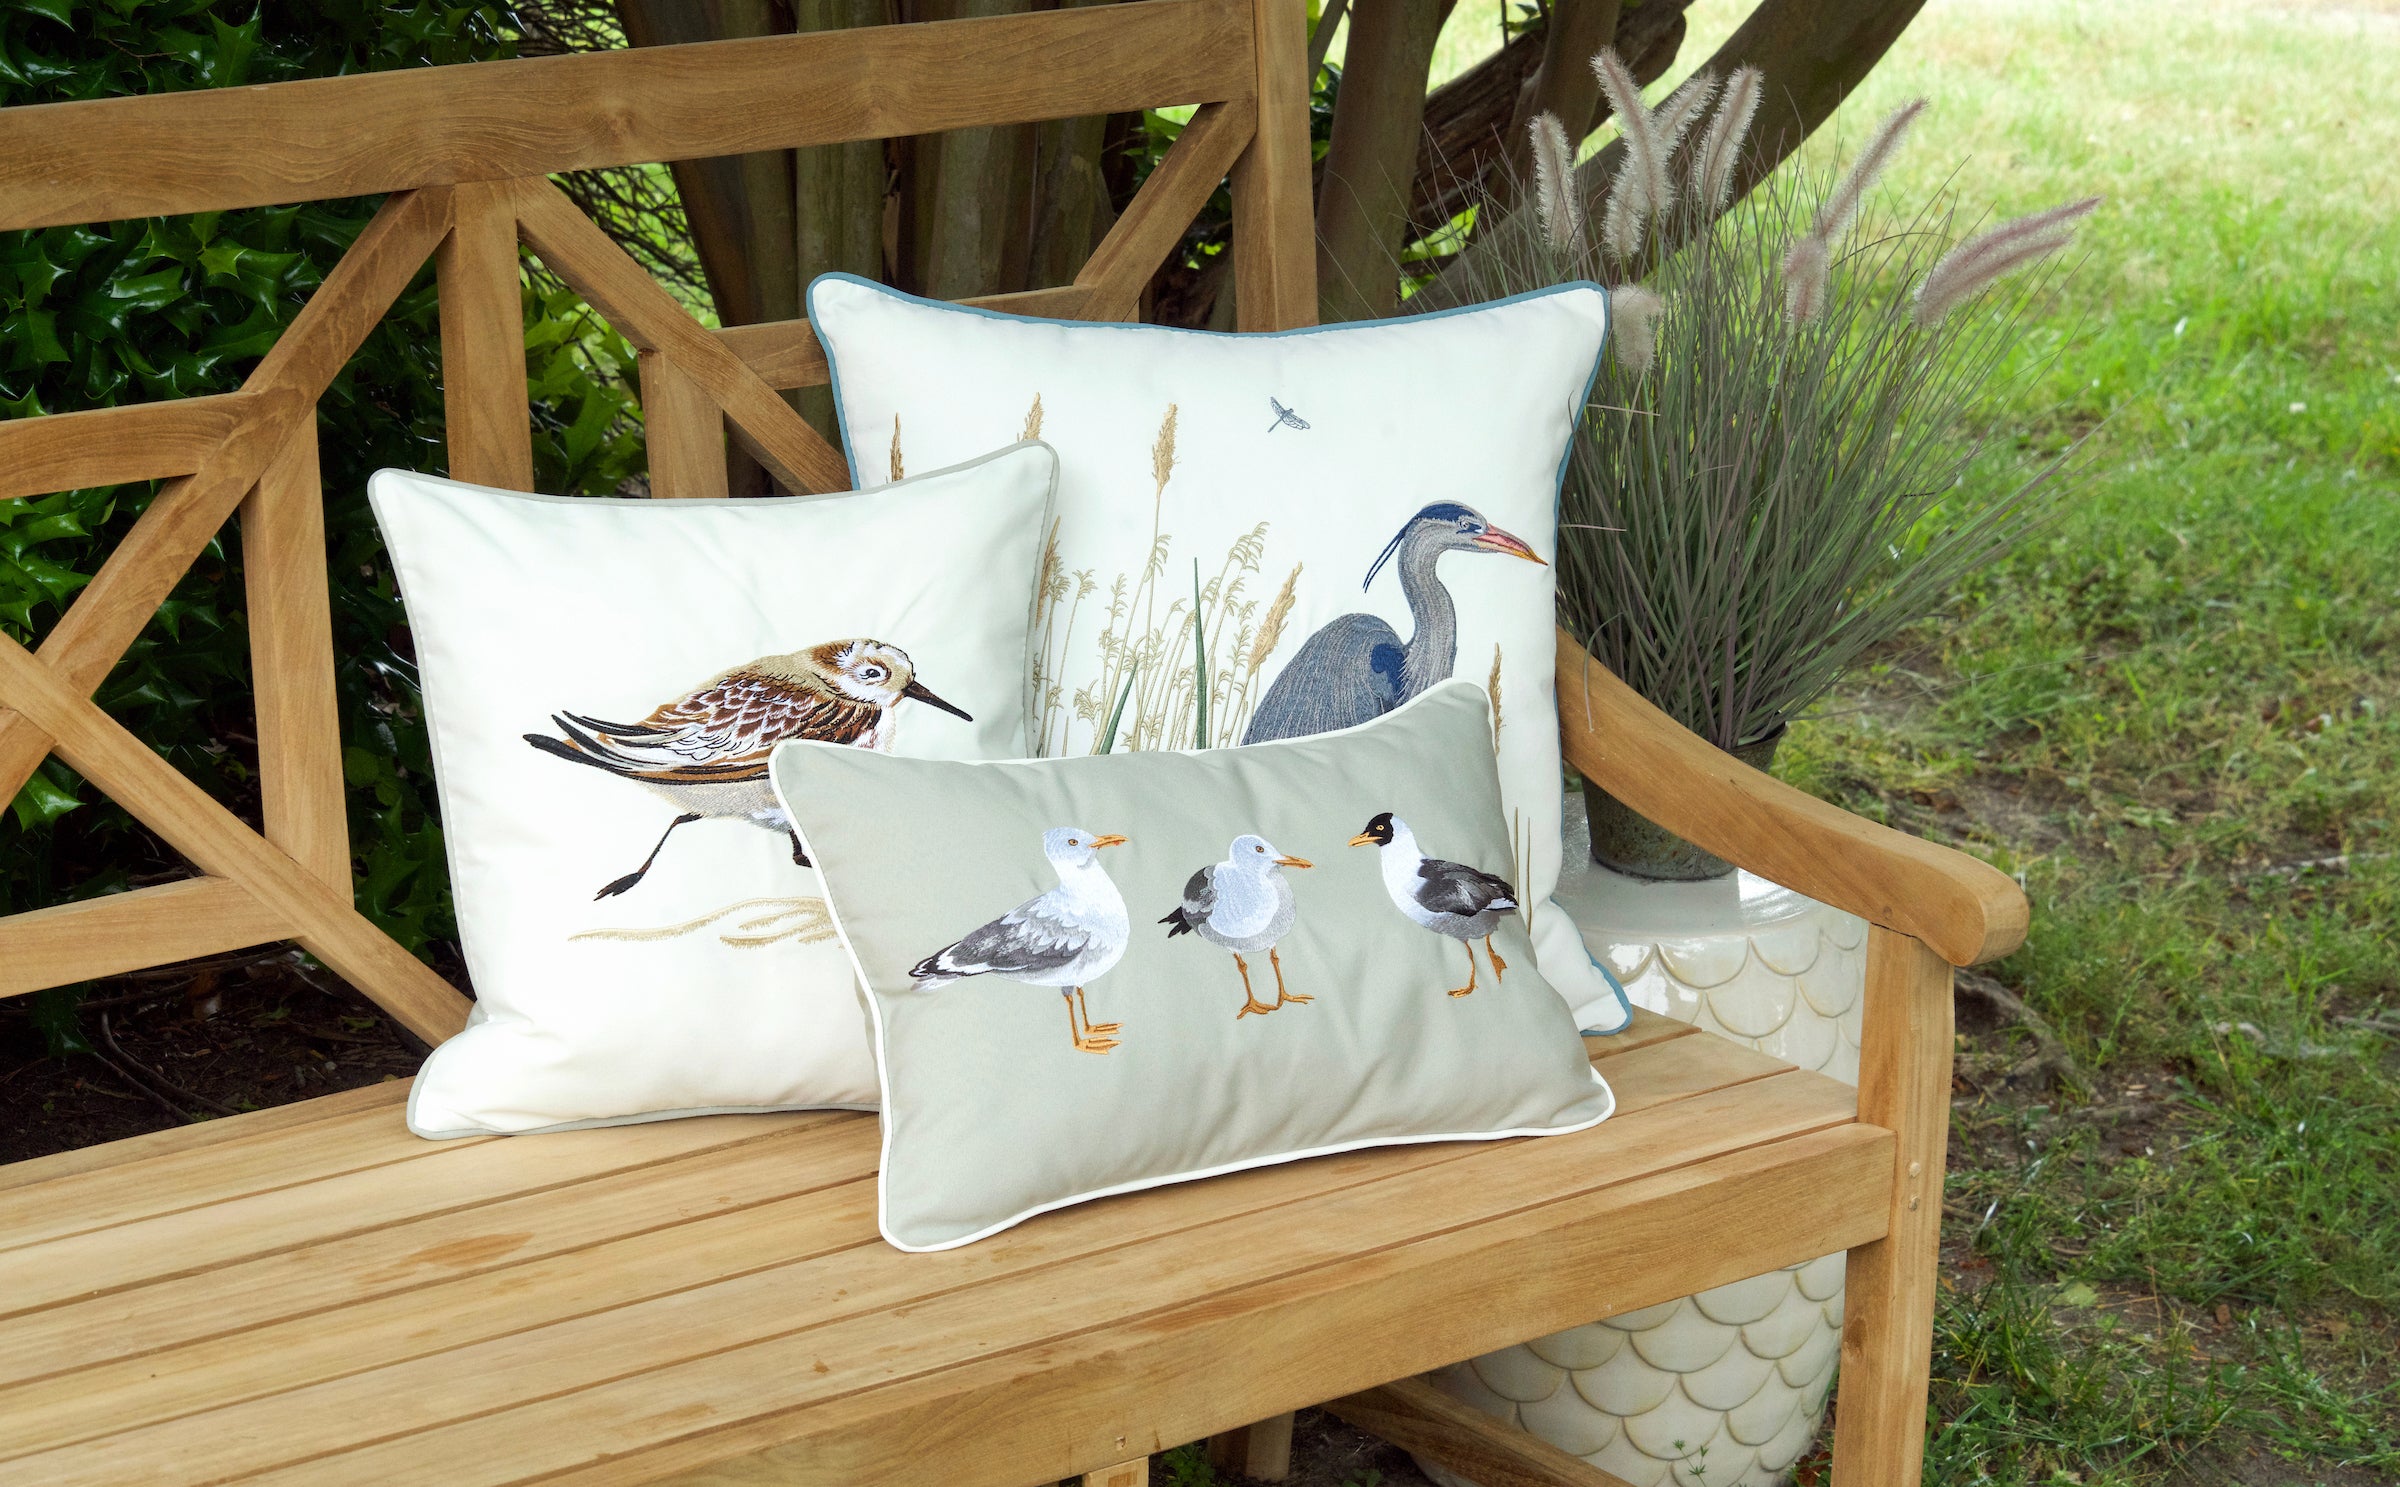 Three pillows on an outdoor bench each embroidered with sea birds. Pillow one has 3 sea gulls, pillow 2 has an avocet, and pillow 3 has a heron. 